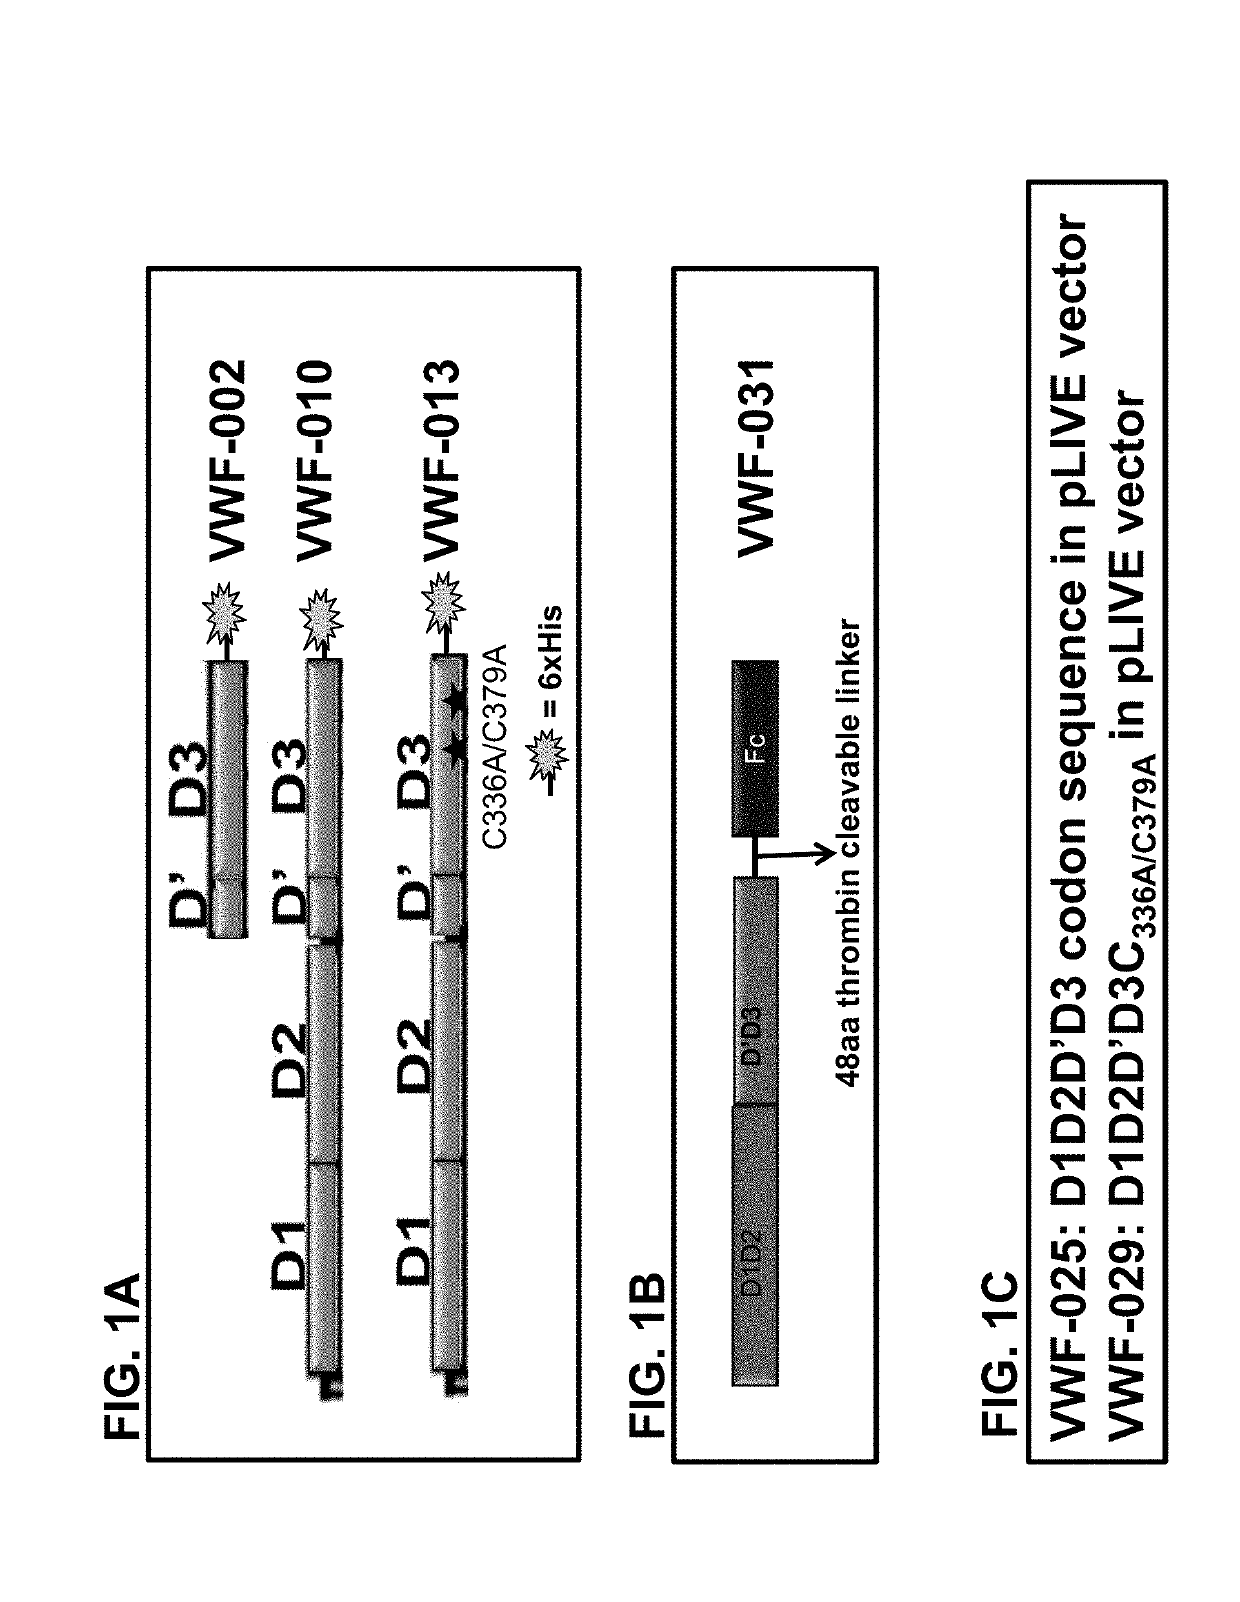 Factor viii complex with xten and von willebrand factor protein, and uses thereof